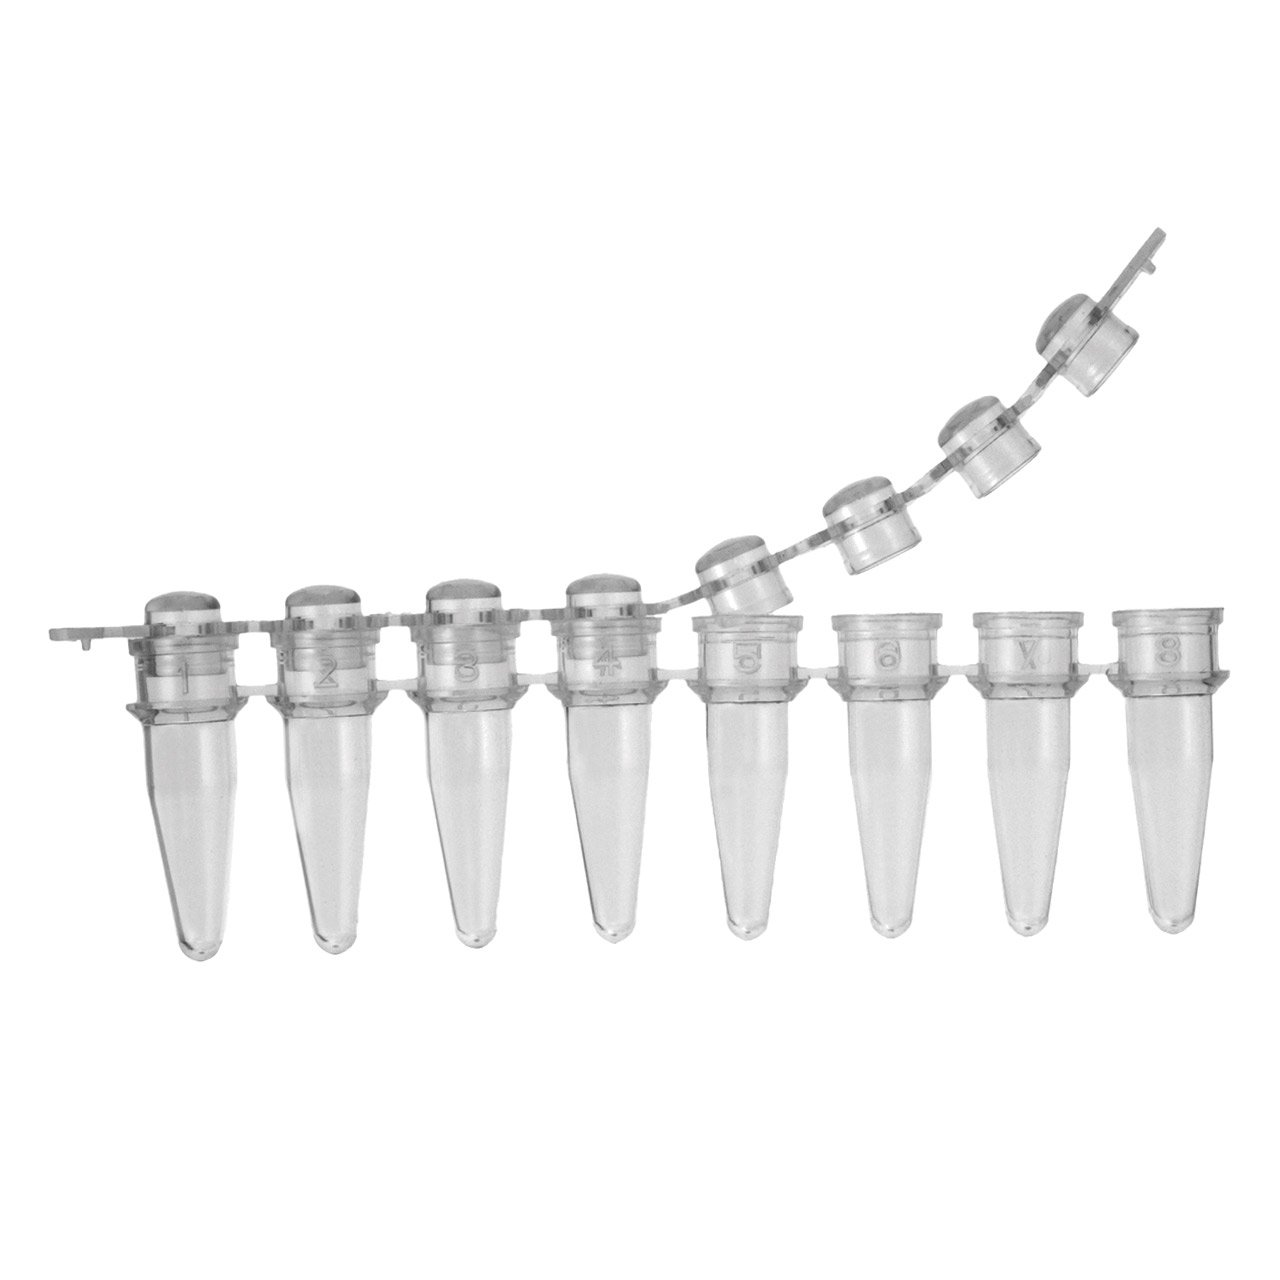 Tubes 0.2ml 8 Strip without Caps Clear Sterile (125)